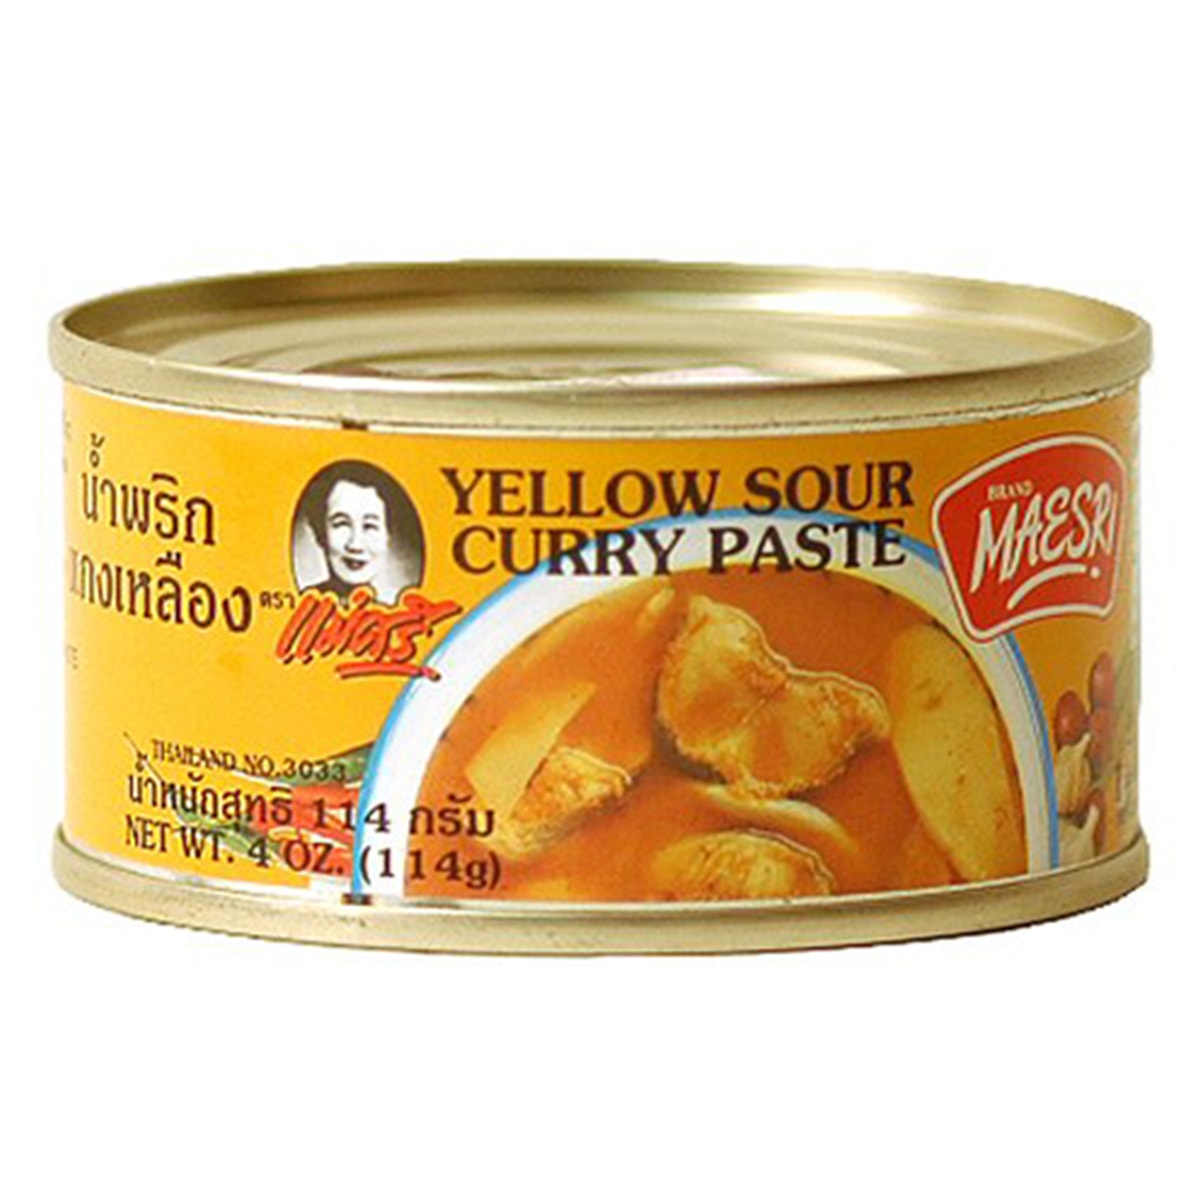 Buy Maesri Yellow Sour Curry Paste - 114 gm